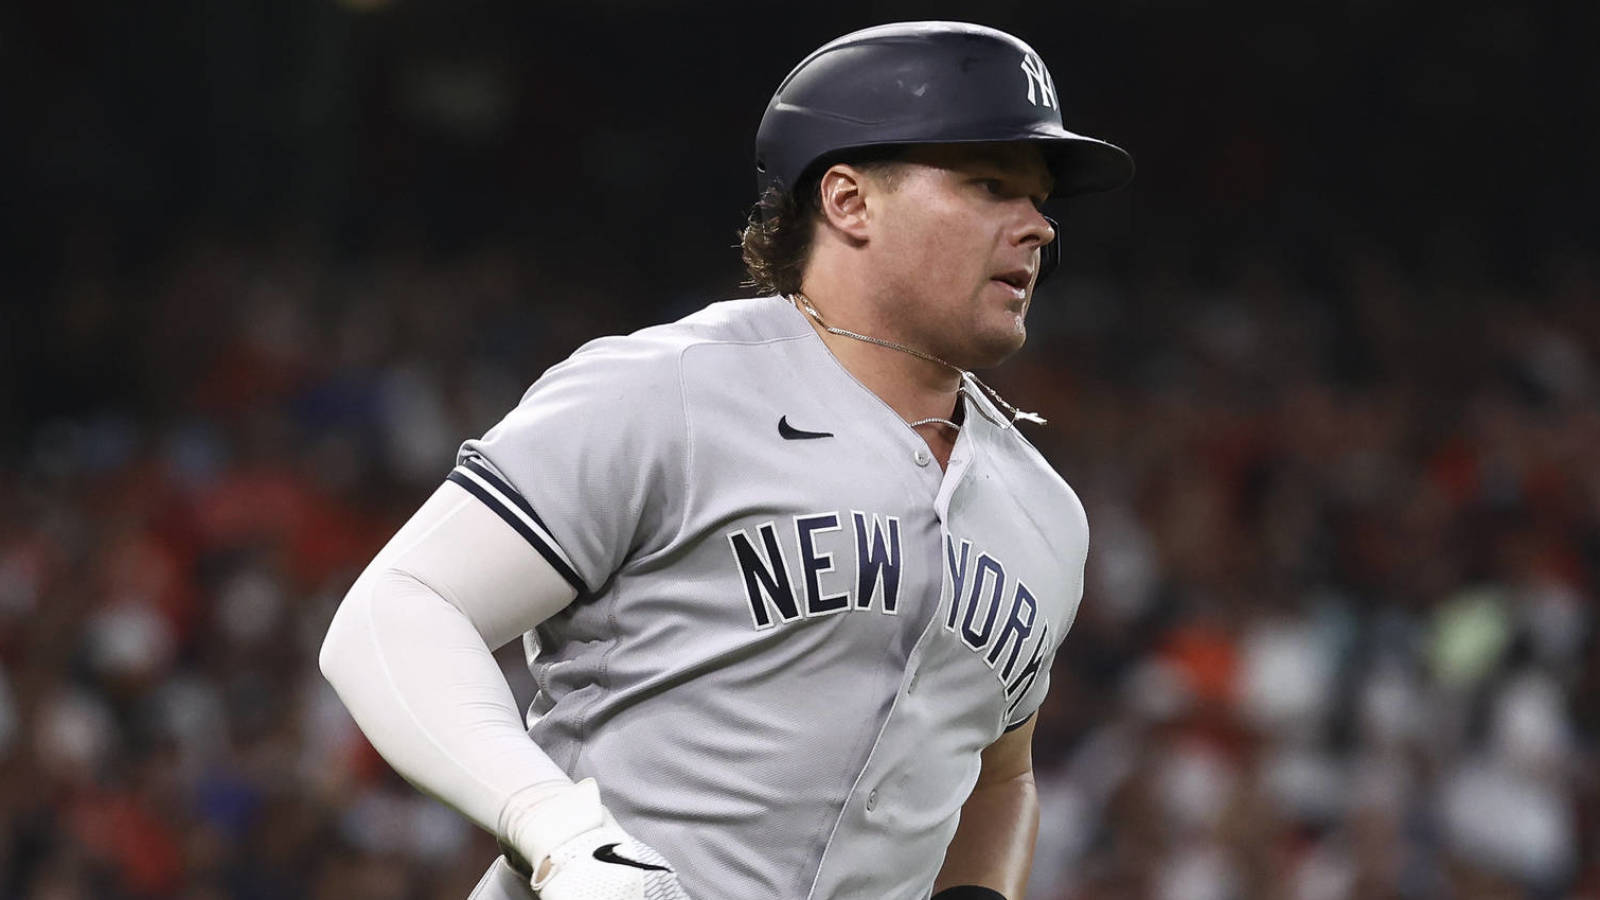 Yankees 1B Luke Voit was in 'bad place mentally' following Anthony Rizzo trade